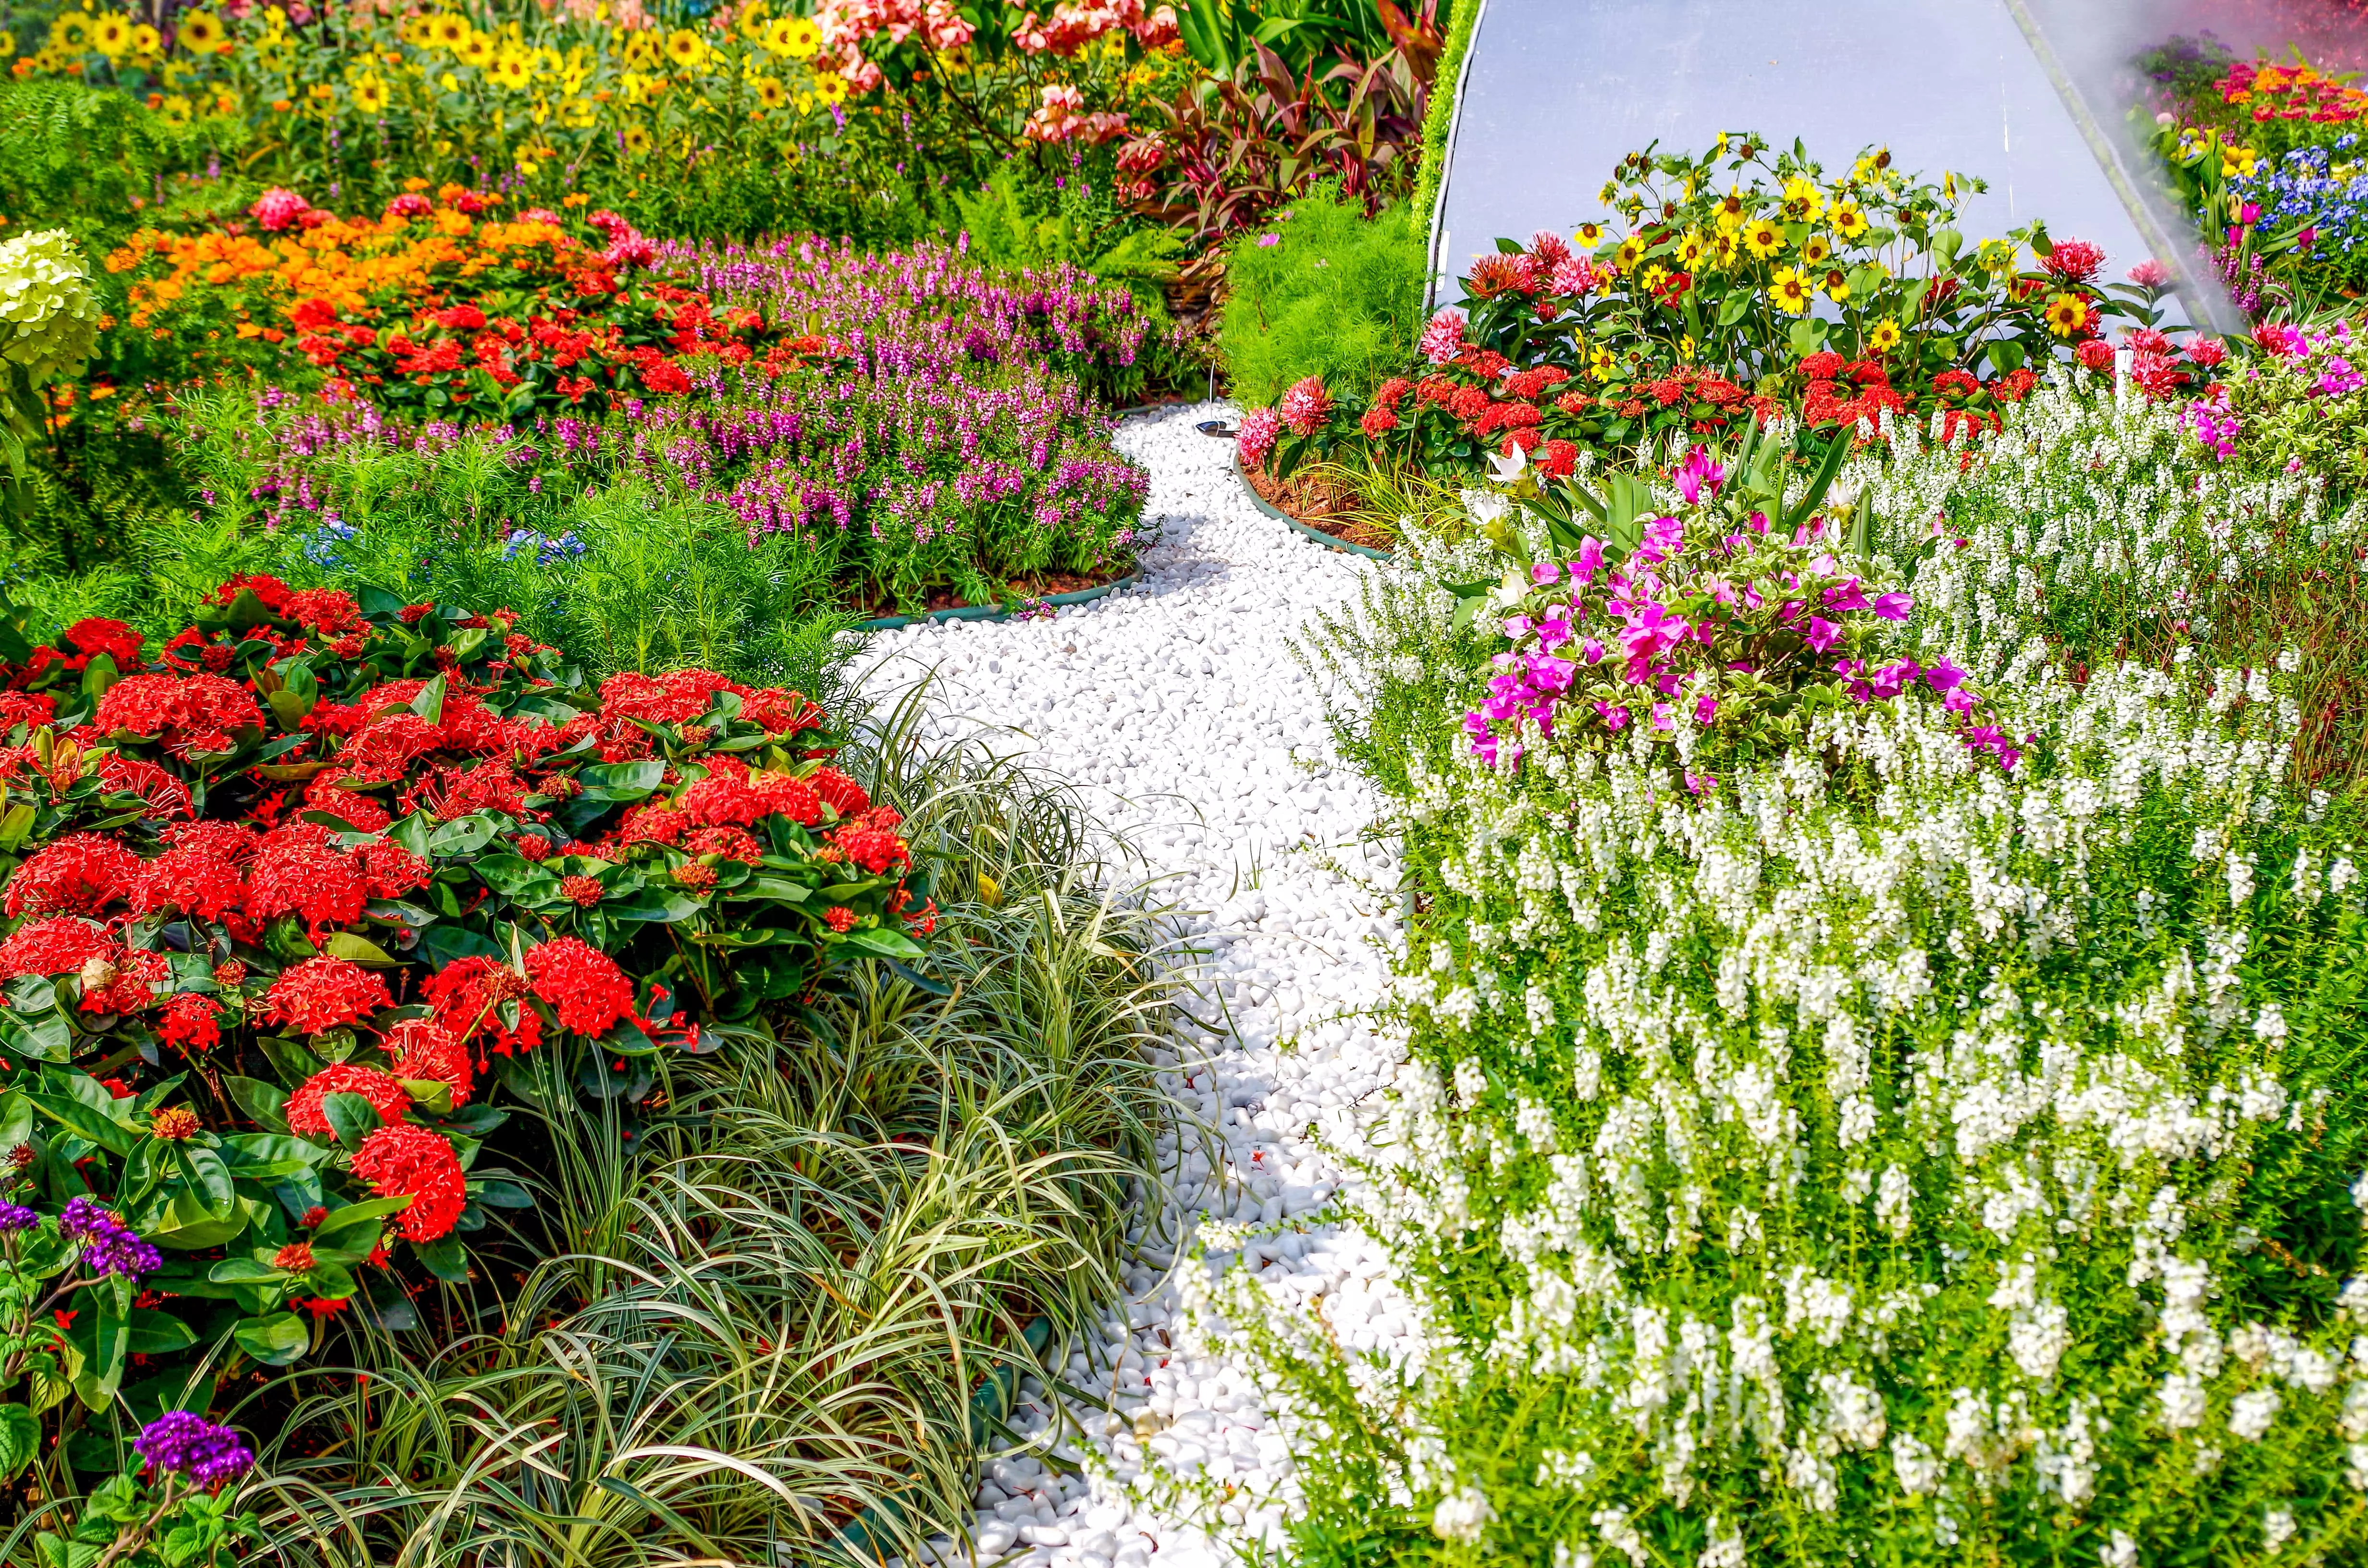 A flower display with a path in the middle